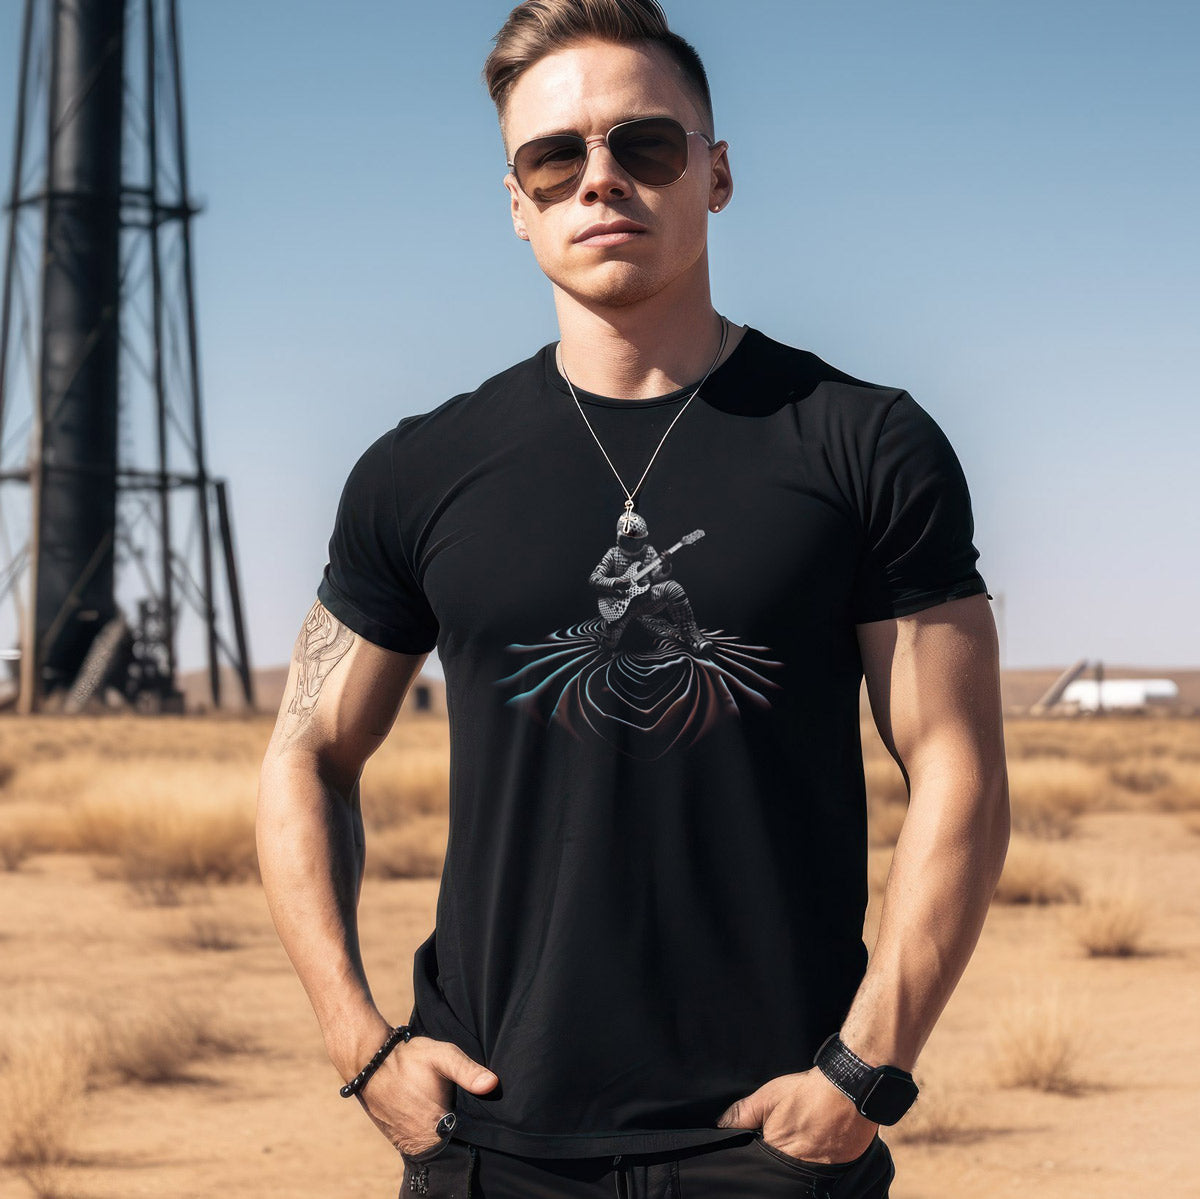 A guy standing in front of a rocket launch pad wearing a black t-shirt with a guitar playing spaceman print